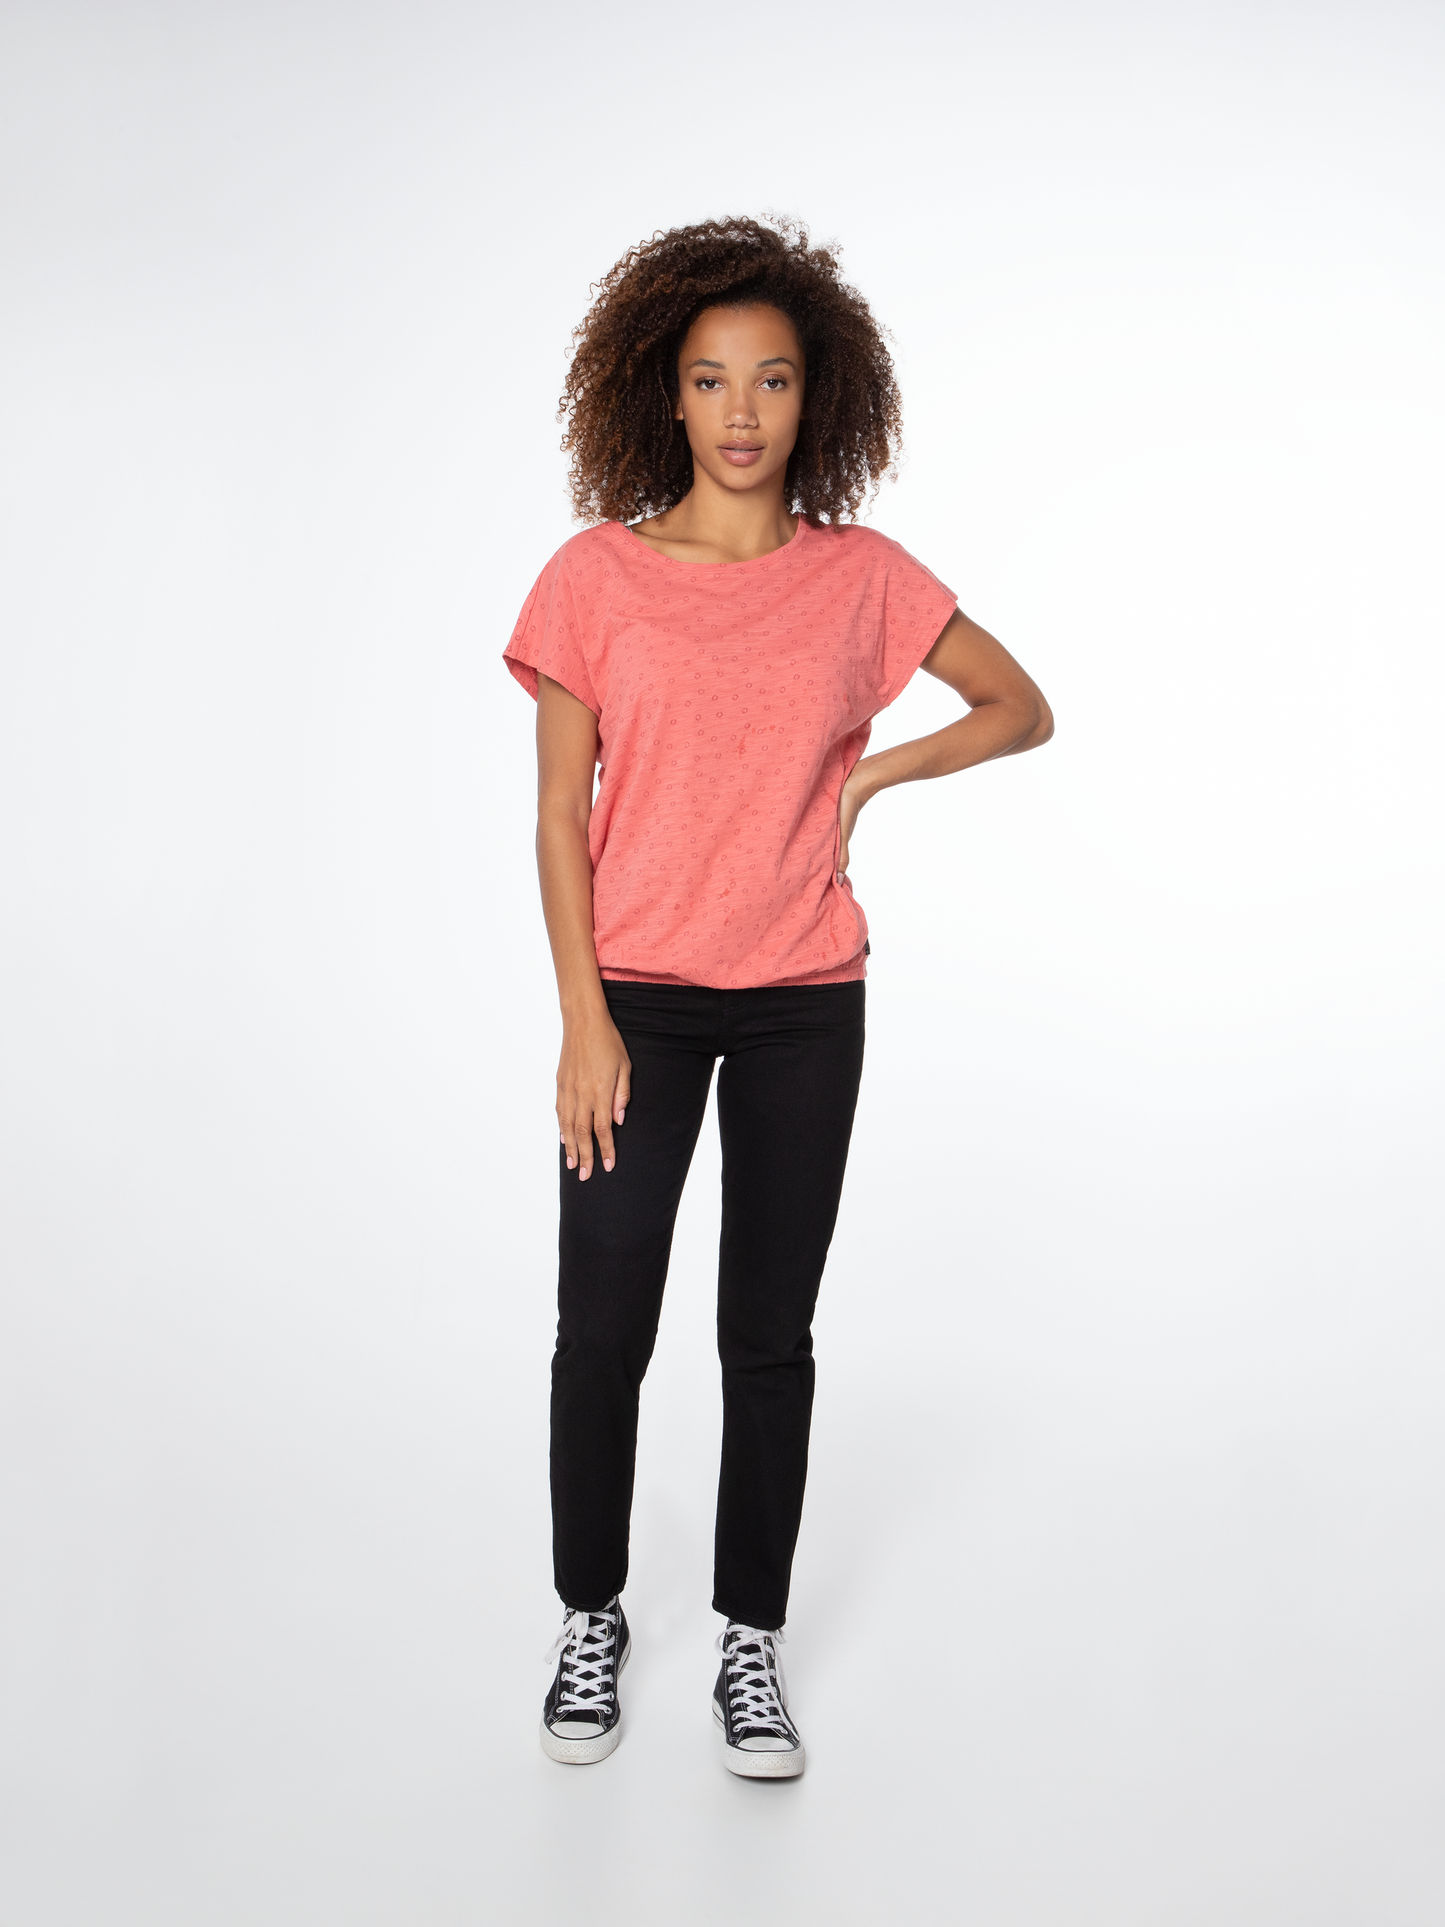 Protest NXG Walpole T-Shirt in Cottage Rust Pink